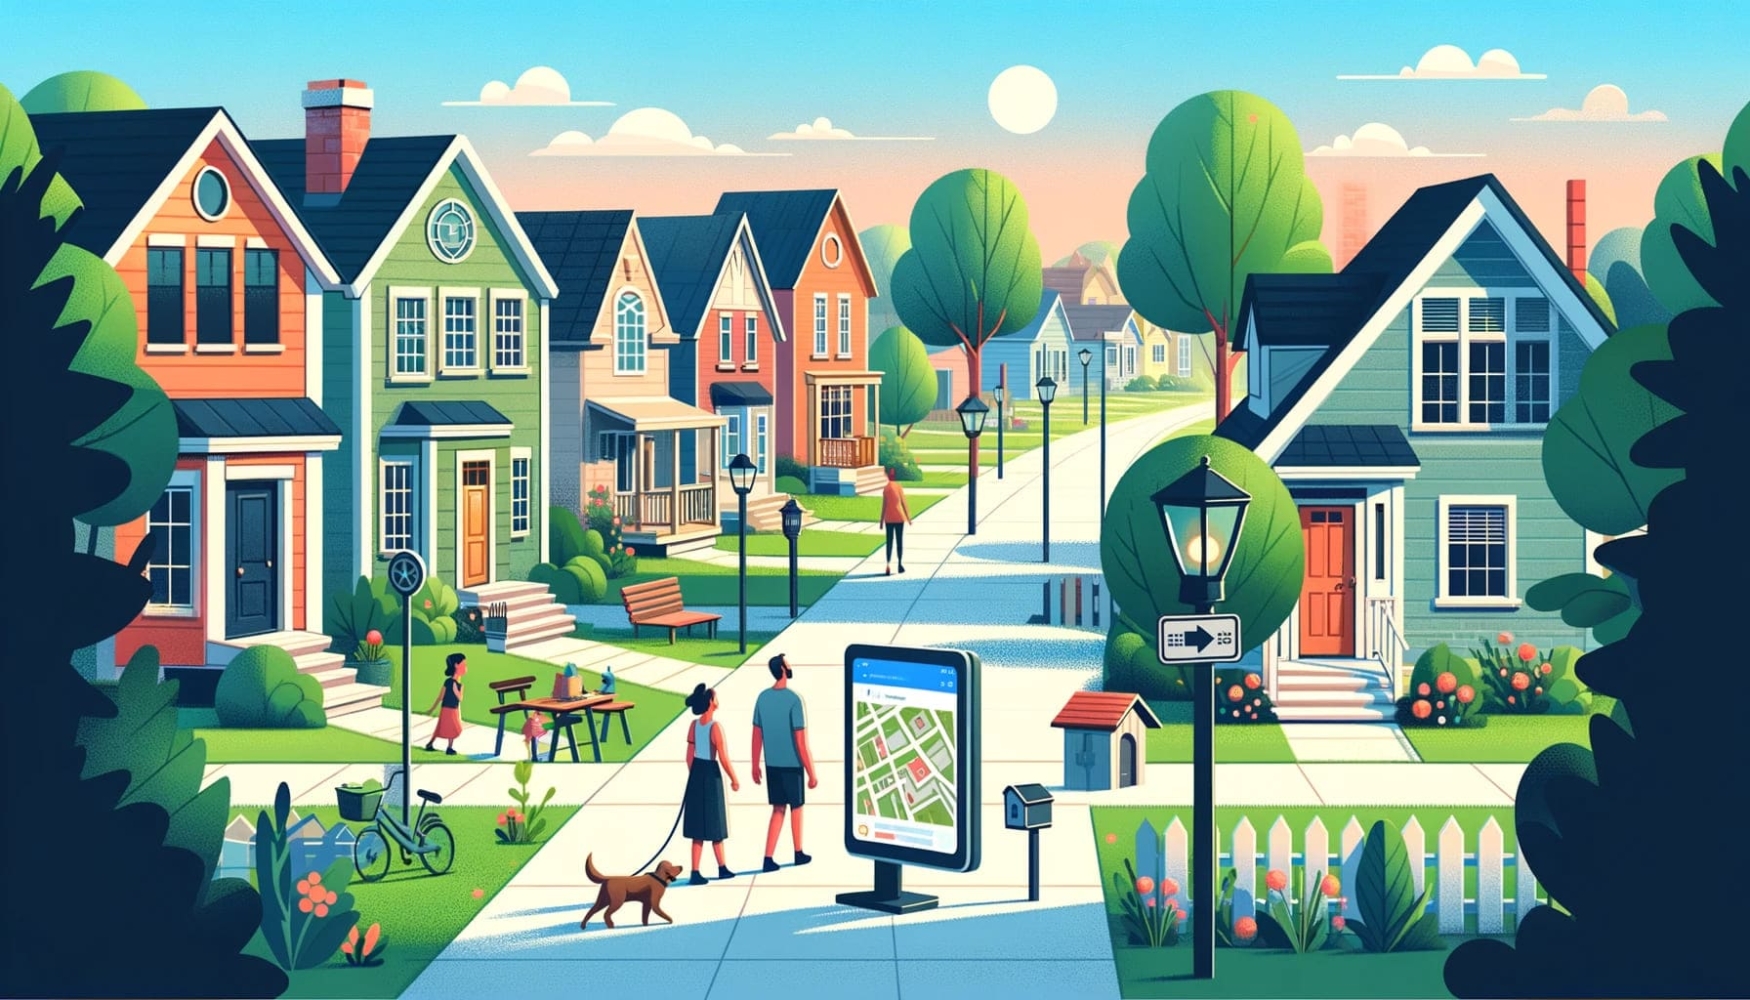 A city street with two-story houses, green grass, flowers and trees, in the foreground is a couple with a dog on a leash, a little further away is a girl walking with a woman walking in the distance